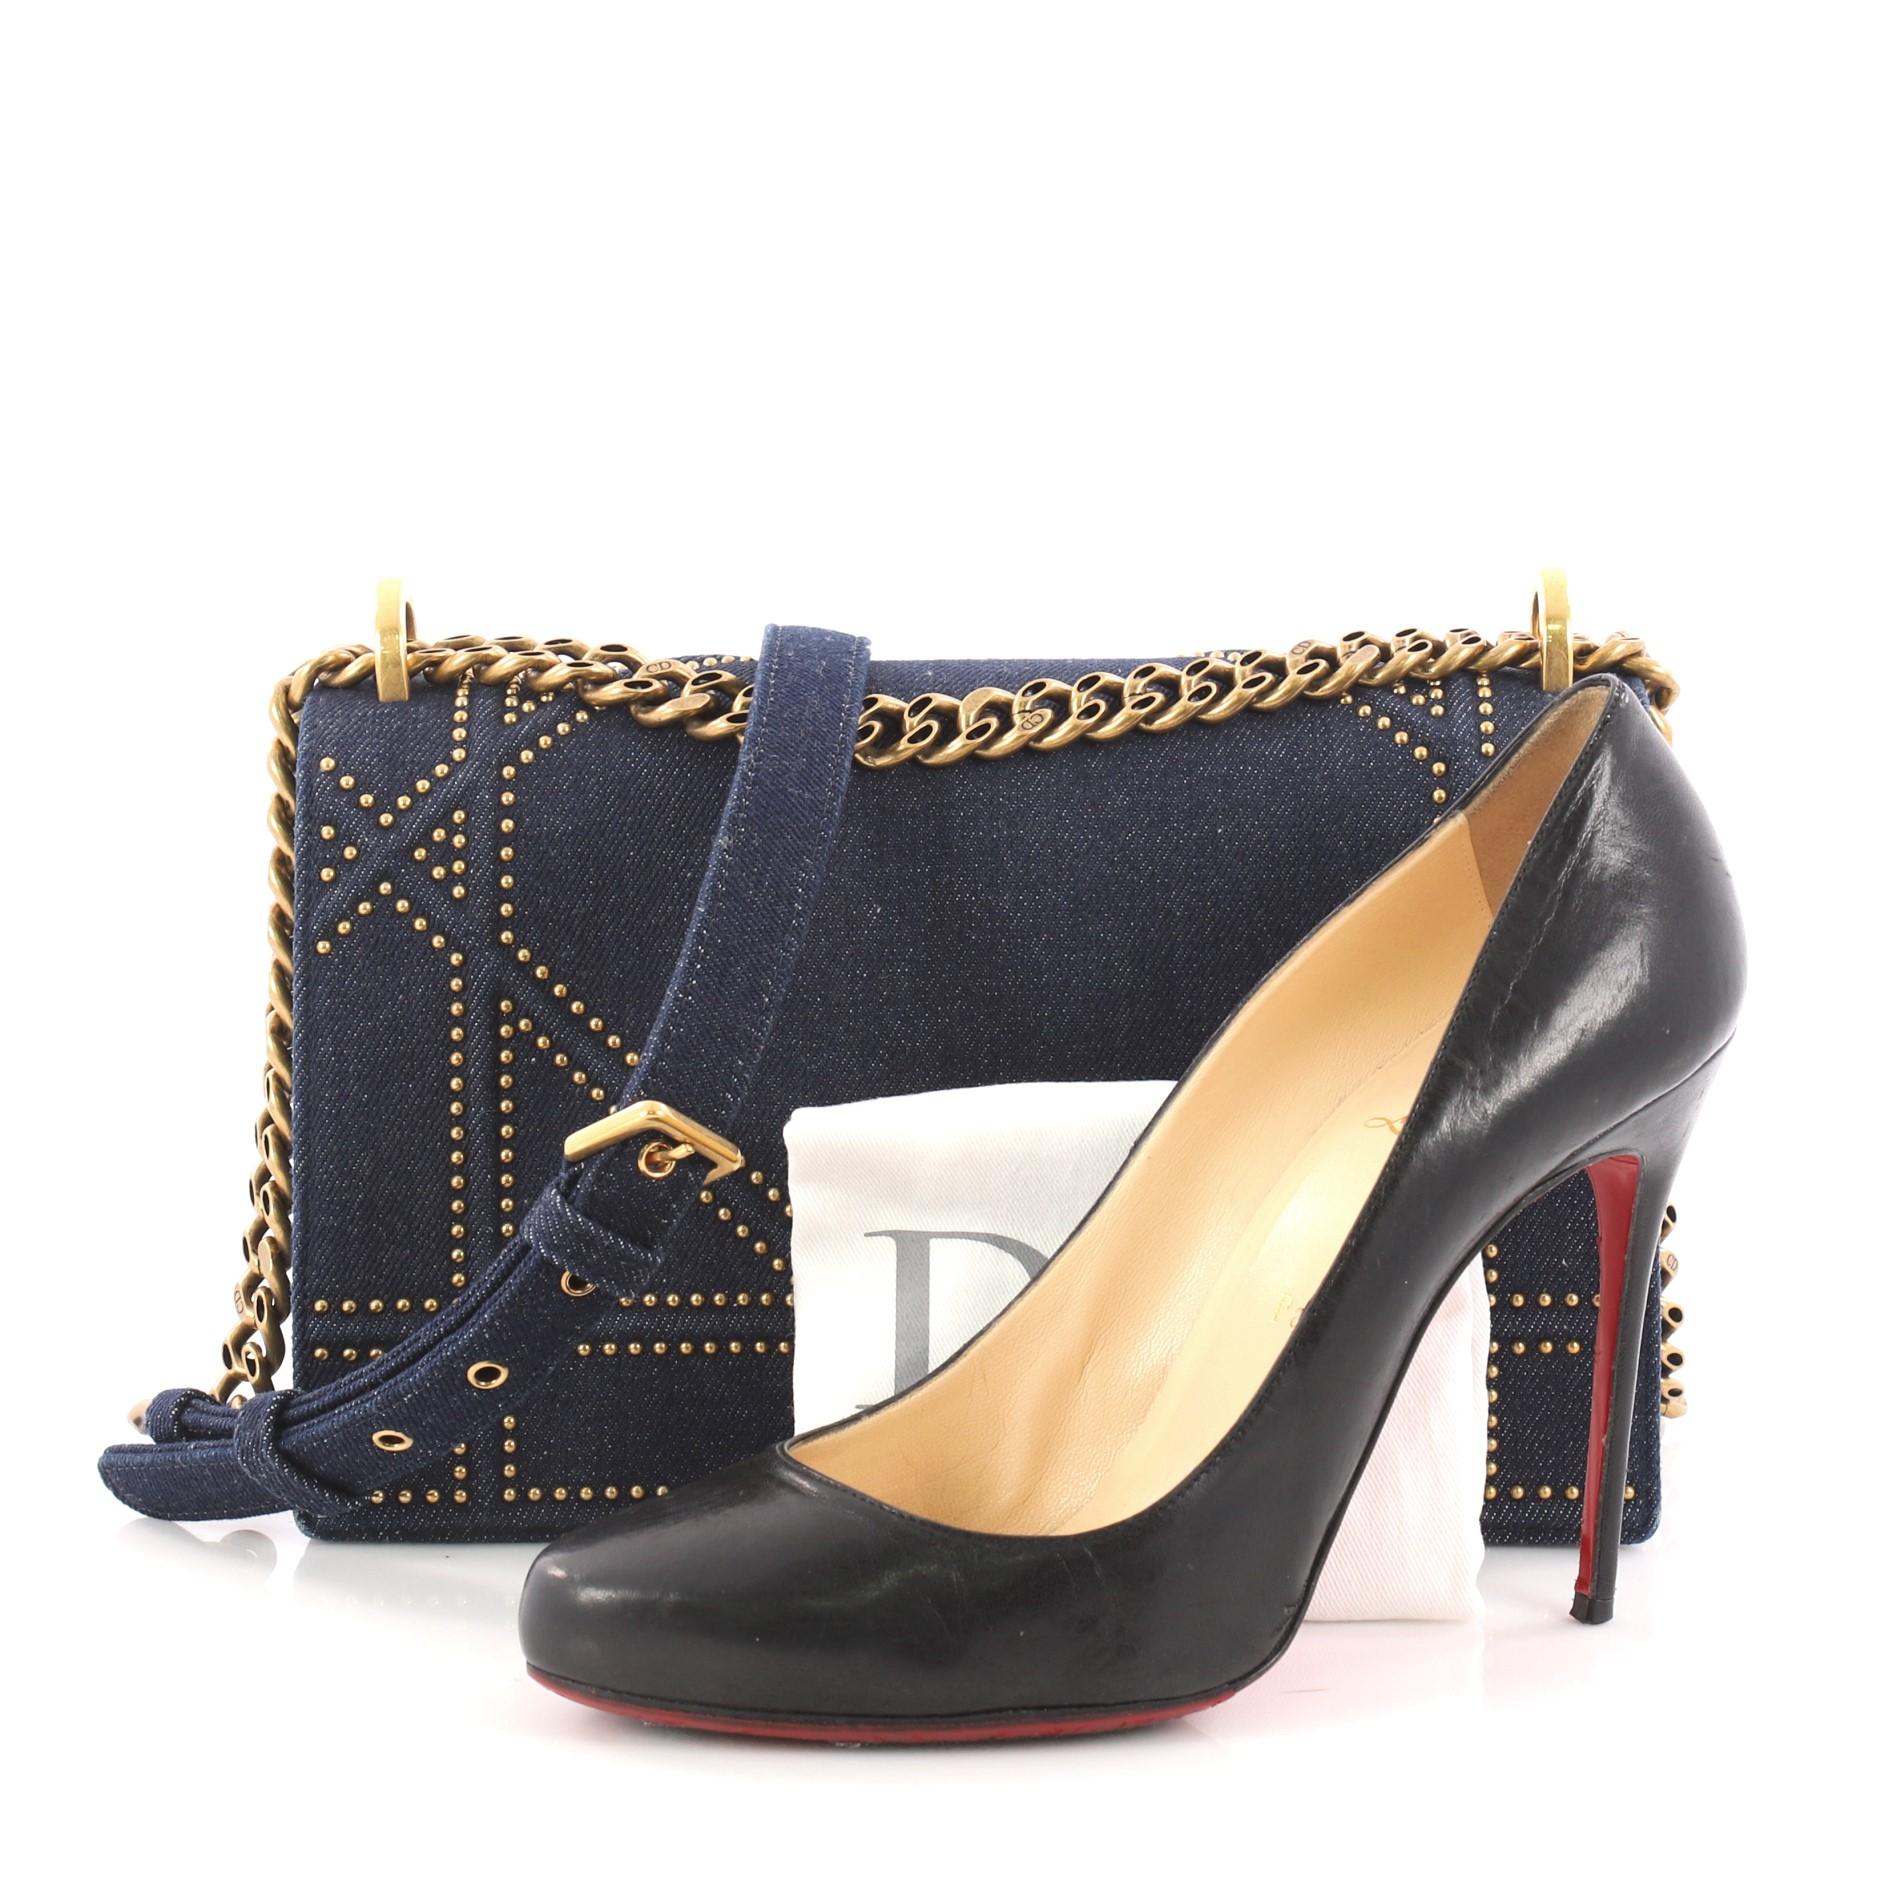 This authentic Christian Dior Diorama Flap Bag Studded Denim Medium is a new classic from Dior. Crafted in blue denim, this architectural flap bag features an oversized graphic-style cannage quilt design with multiple aged gold studs, chunky chain